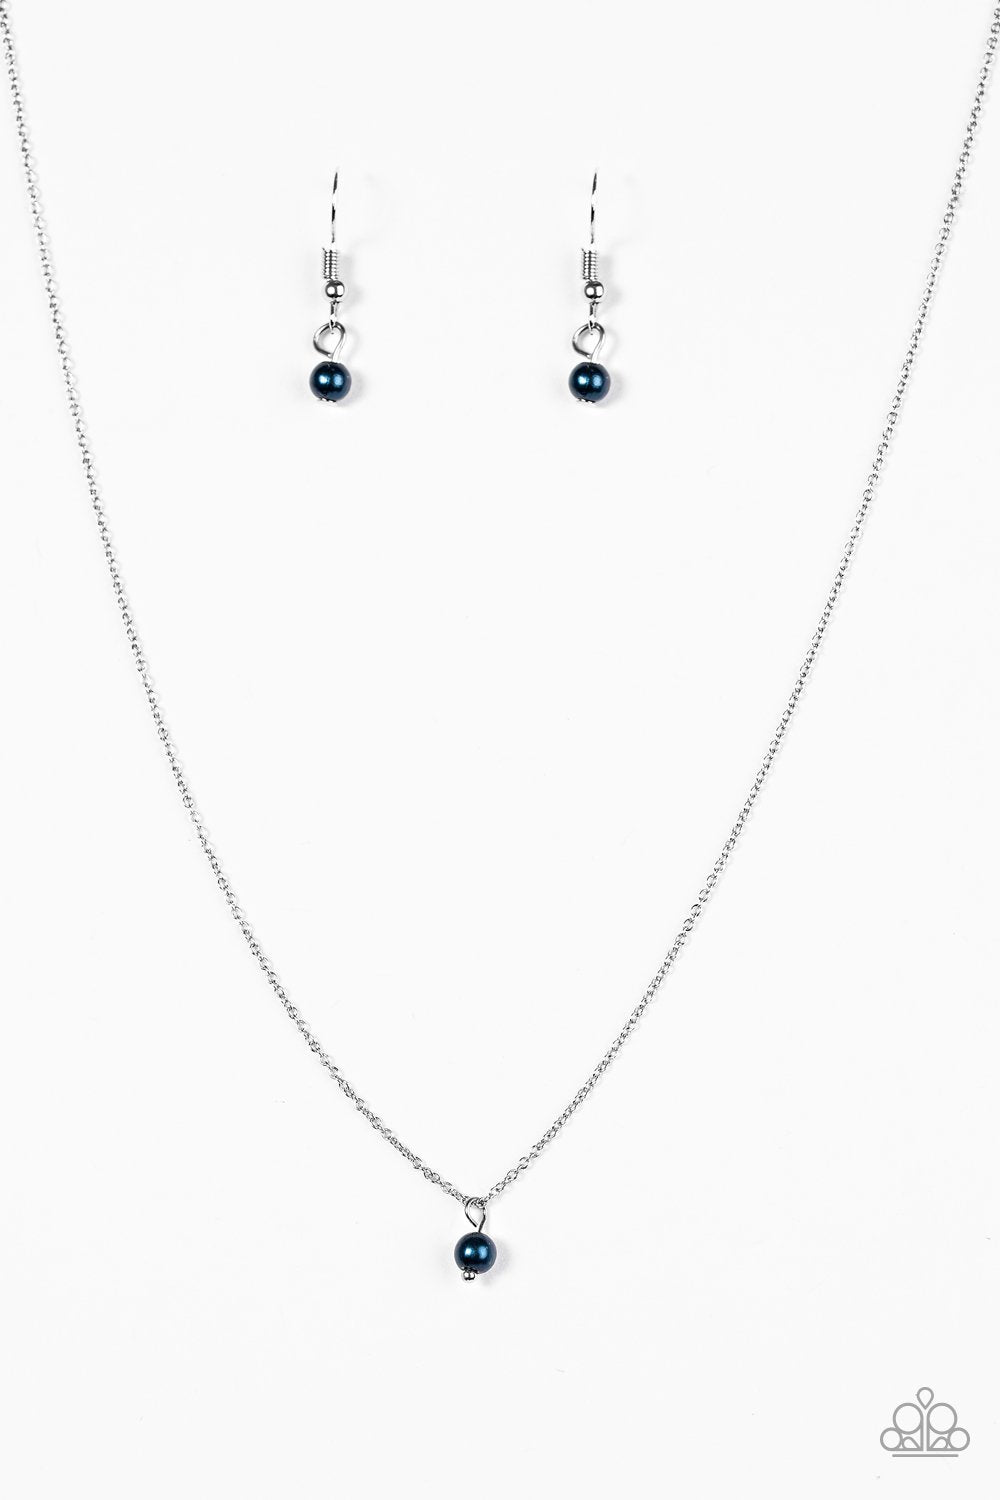 Dainty and Demure Silver and Blue Pearl Necklace - Paparazzi Accessories-CarasShop.com - $5 Jewelry by Cara Jewels